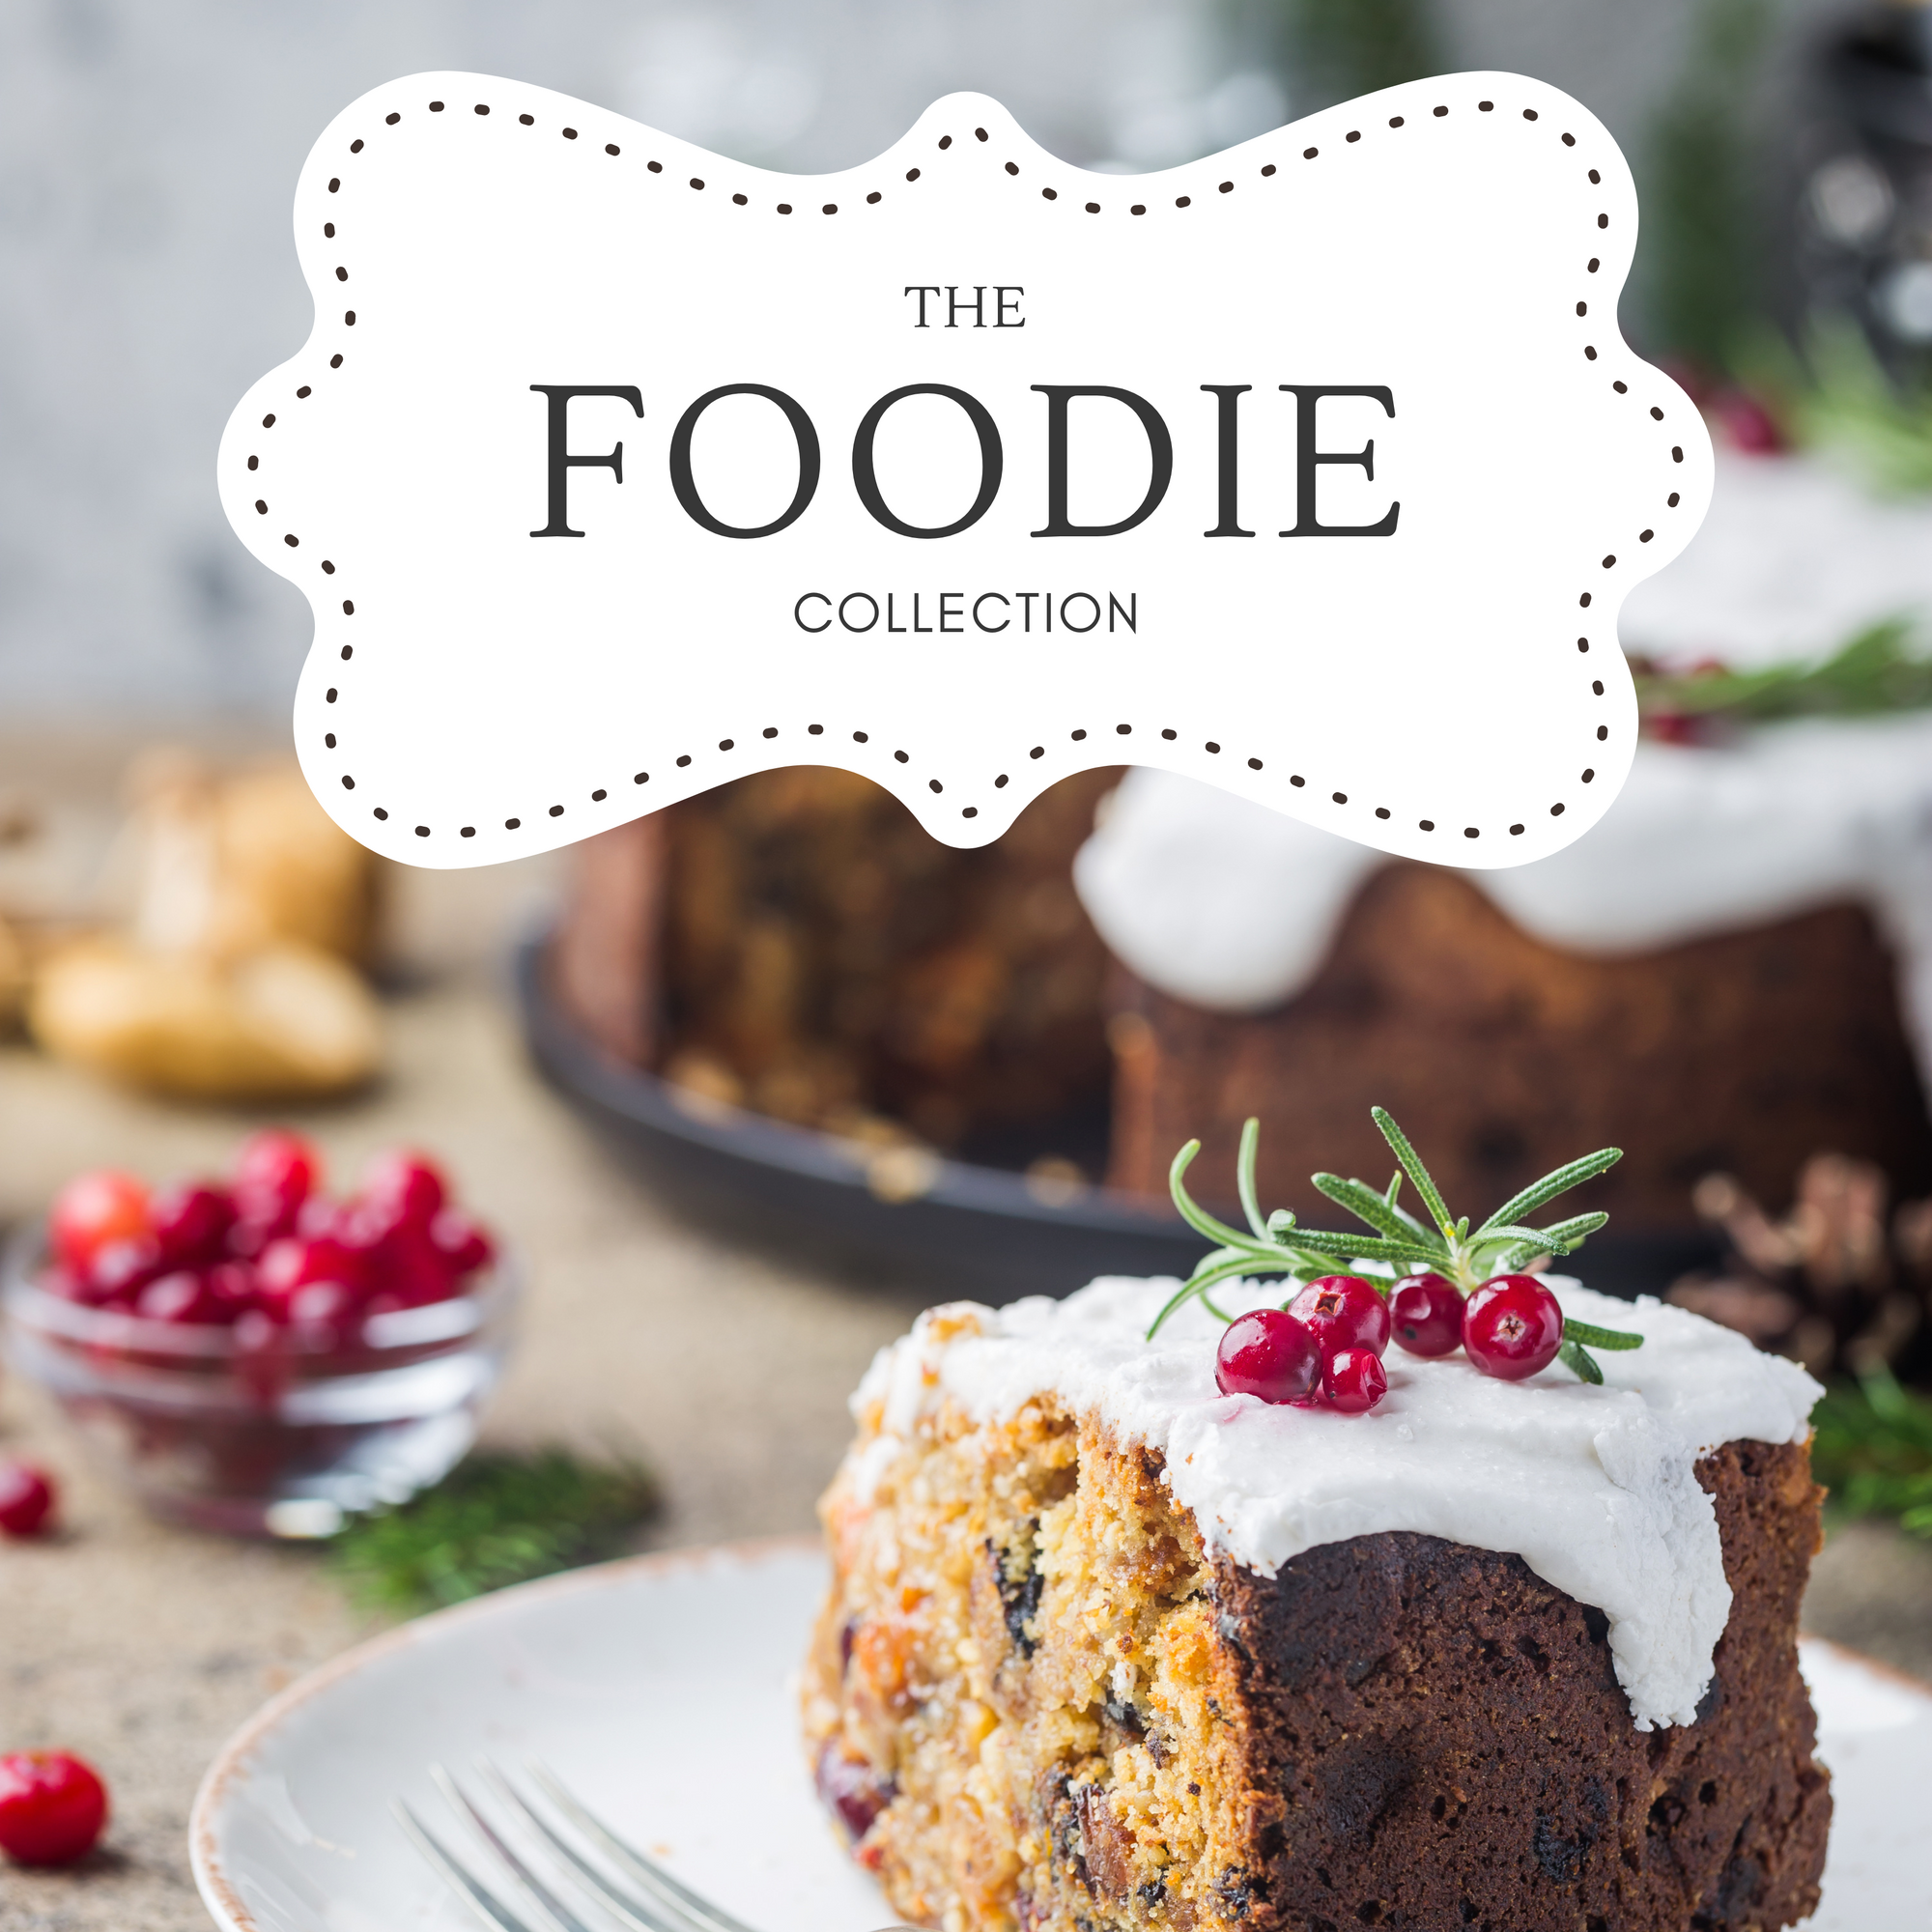 The Foodie Collection